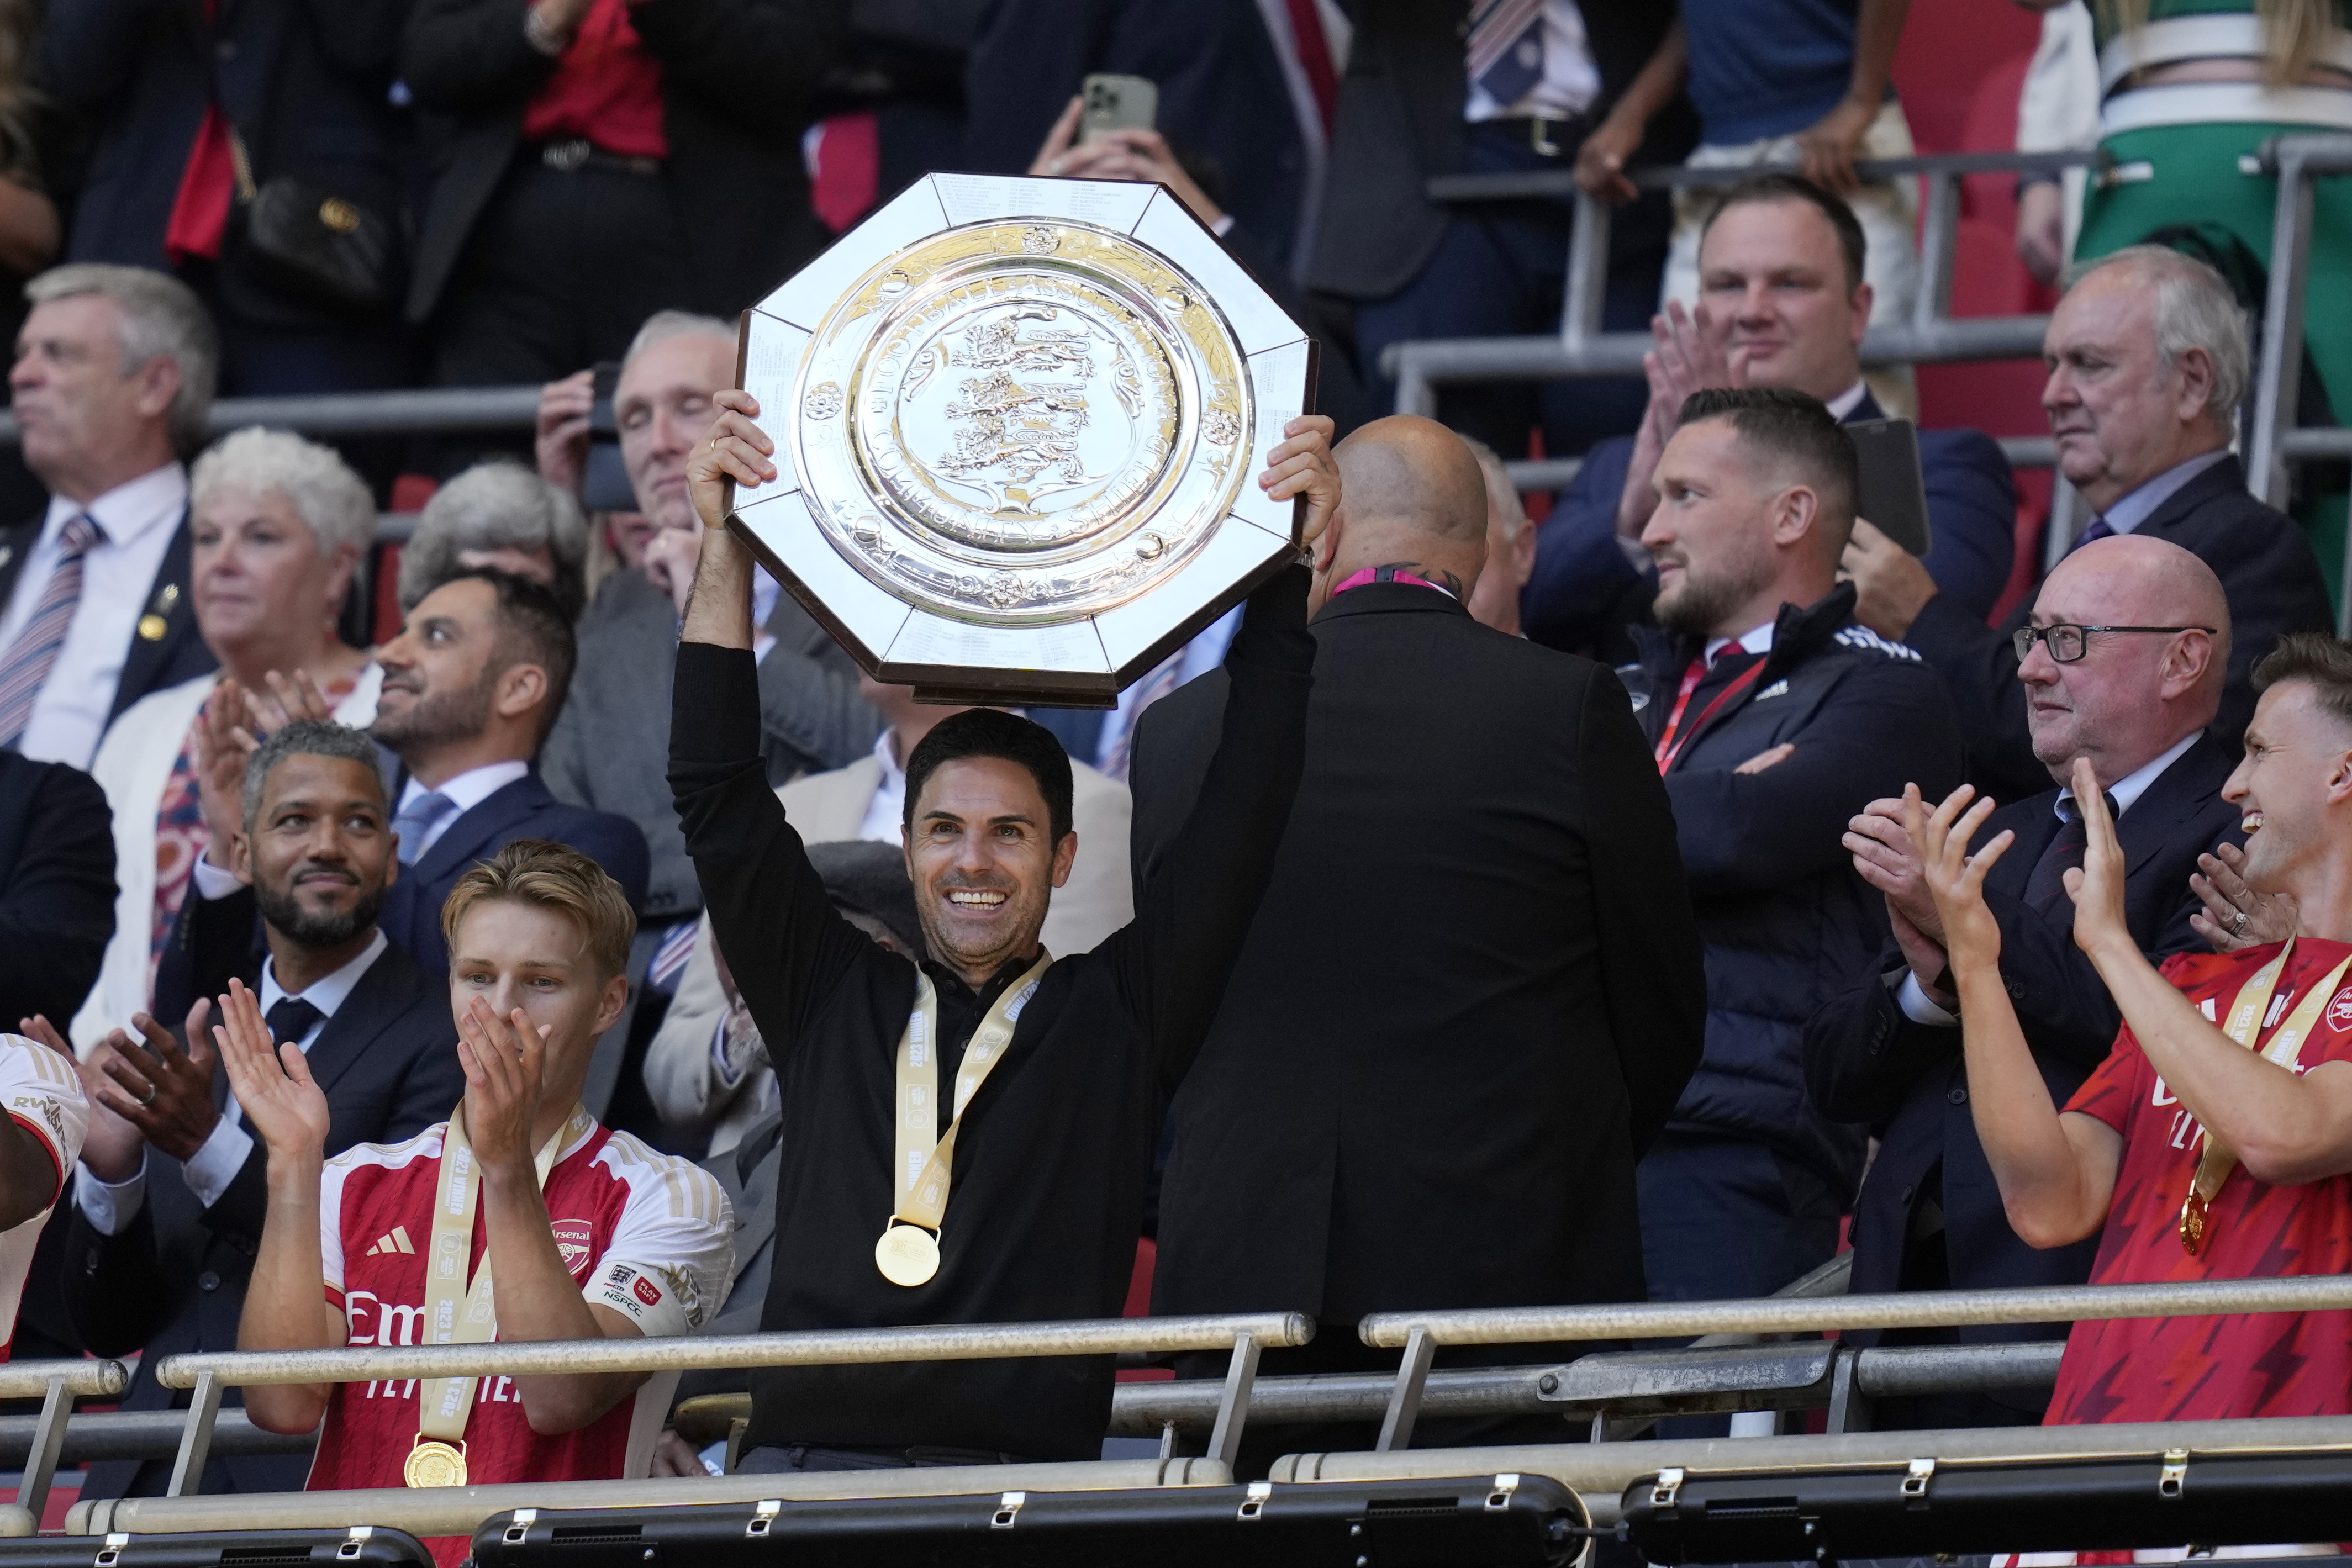 Mikel Arteta guided Arsenal to the Community Shield